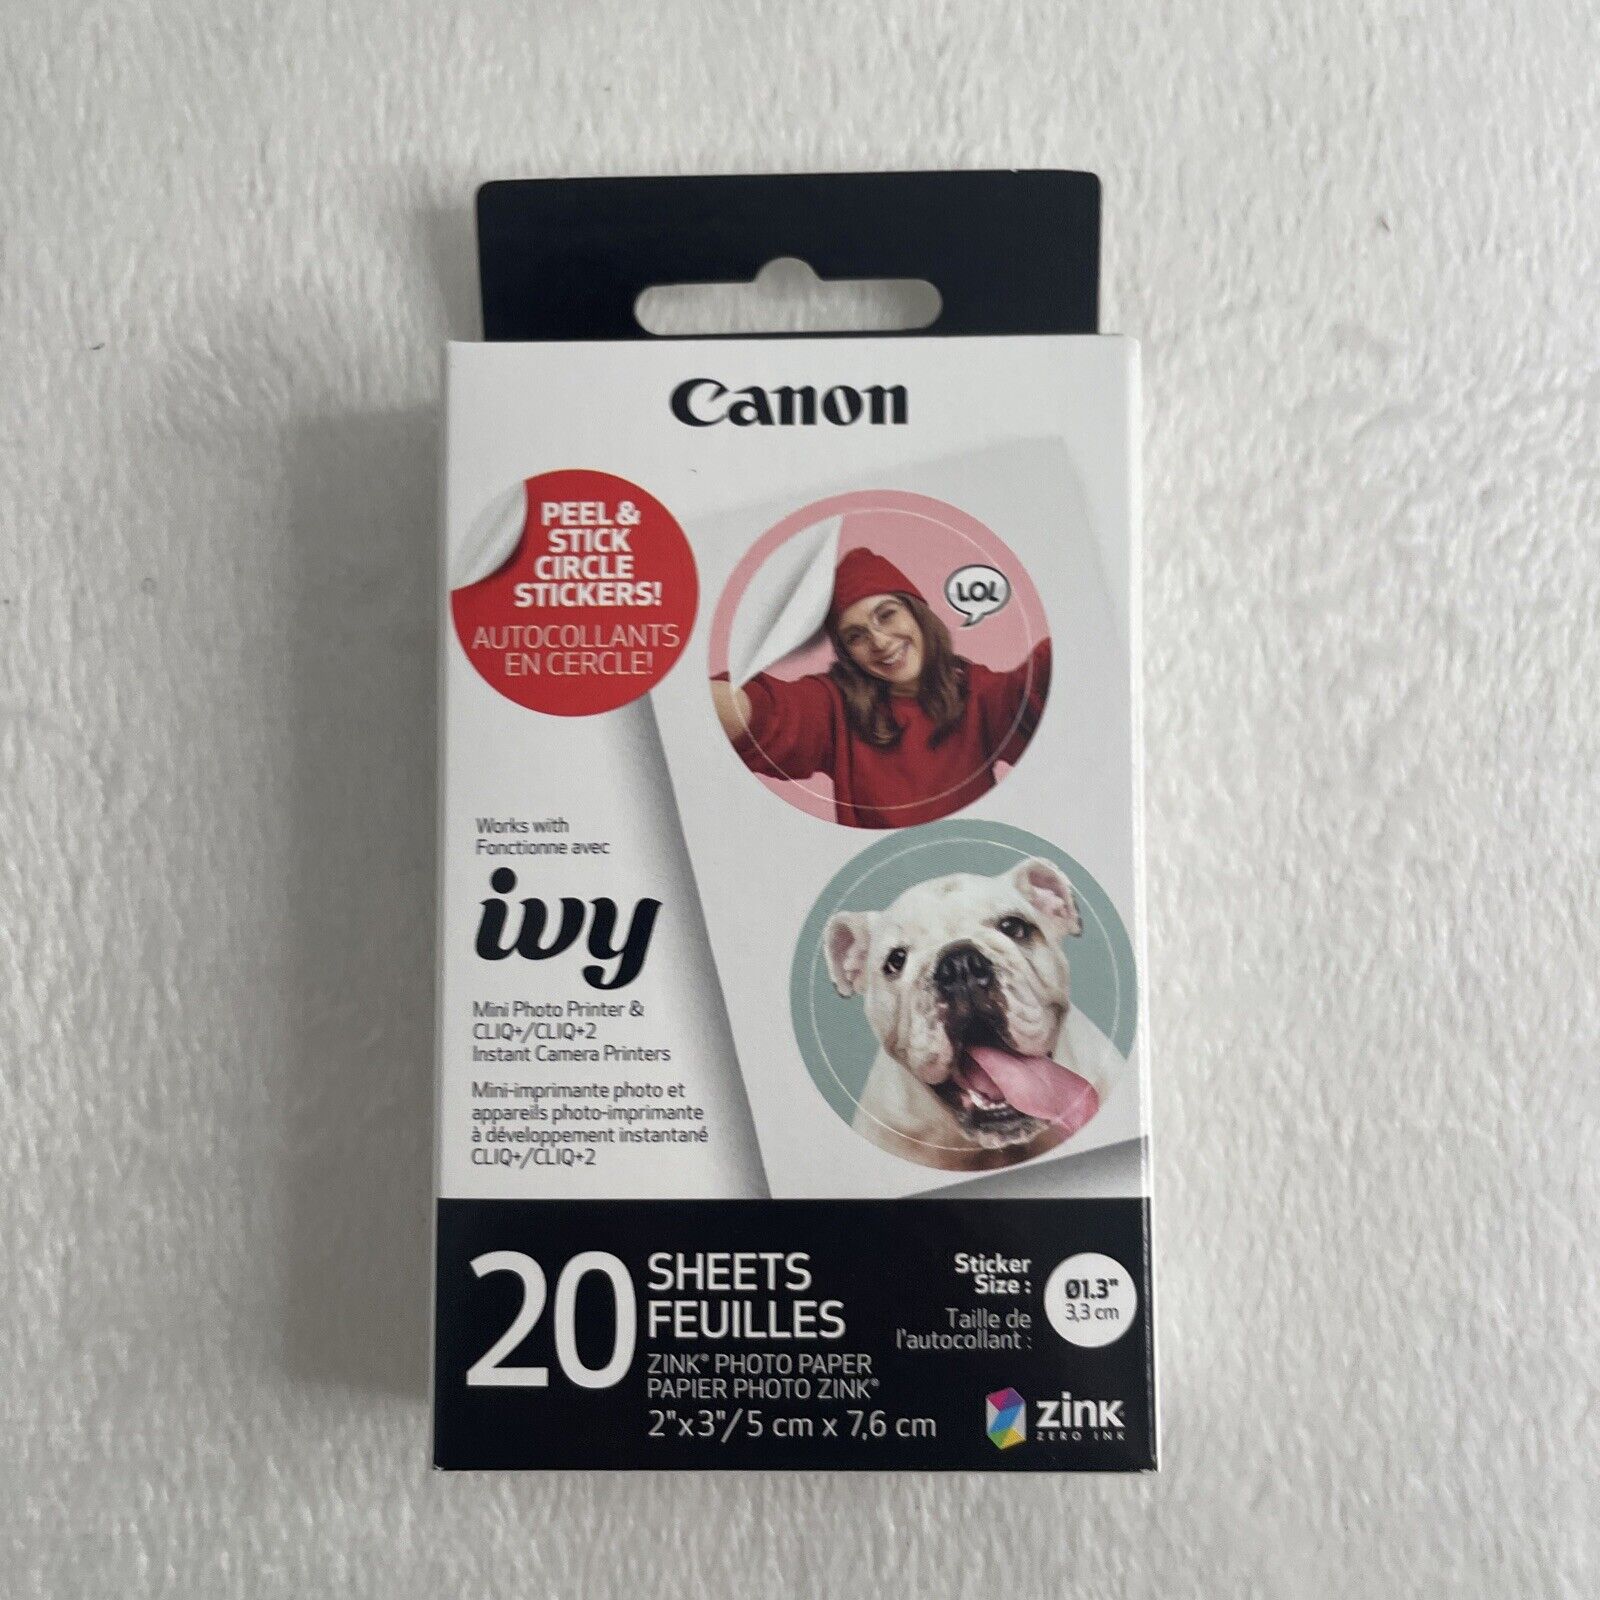 New Canon IVY ZINK Pre-Cut Circle Photo Picture Sticker Paper, 20 Sheets